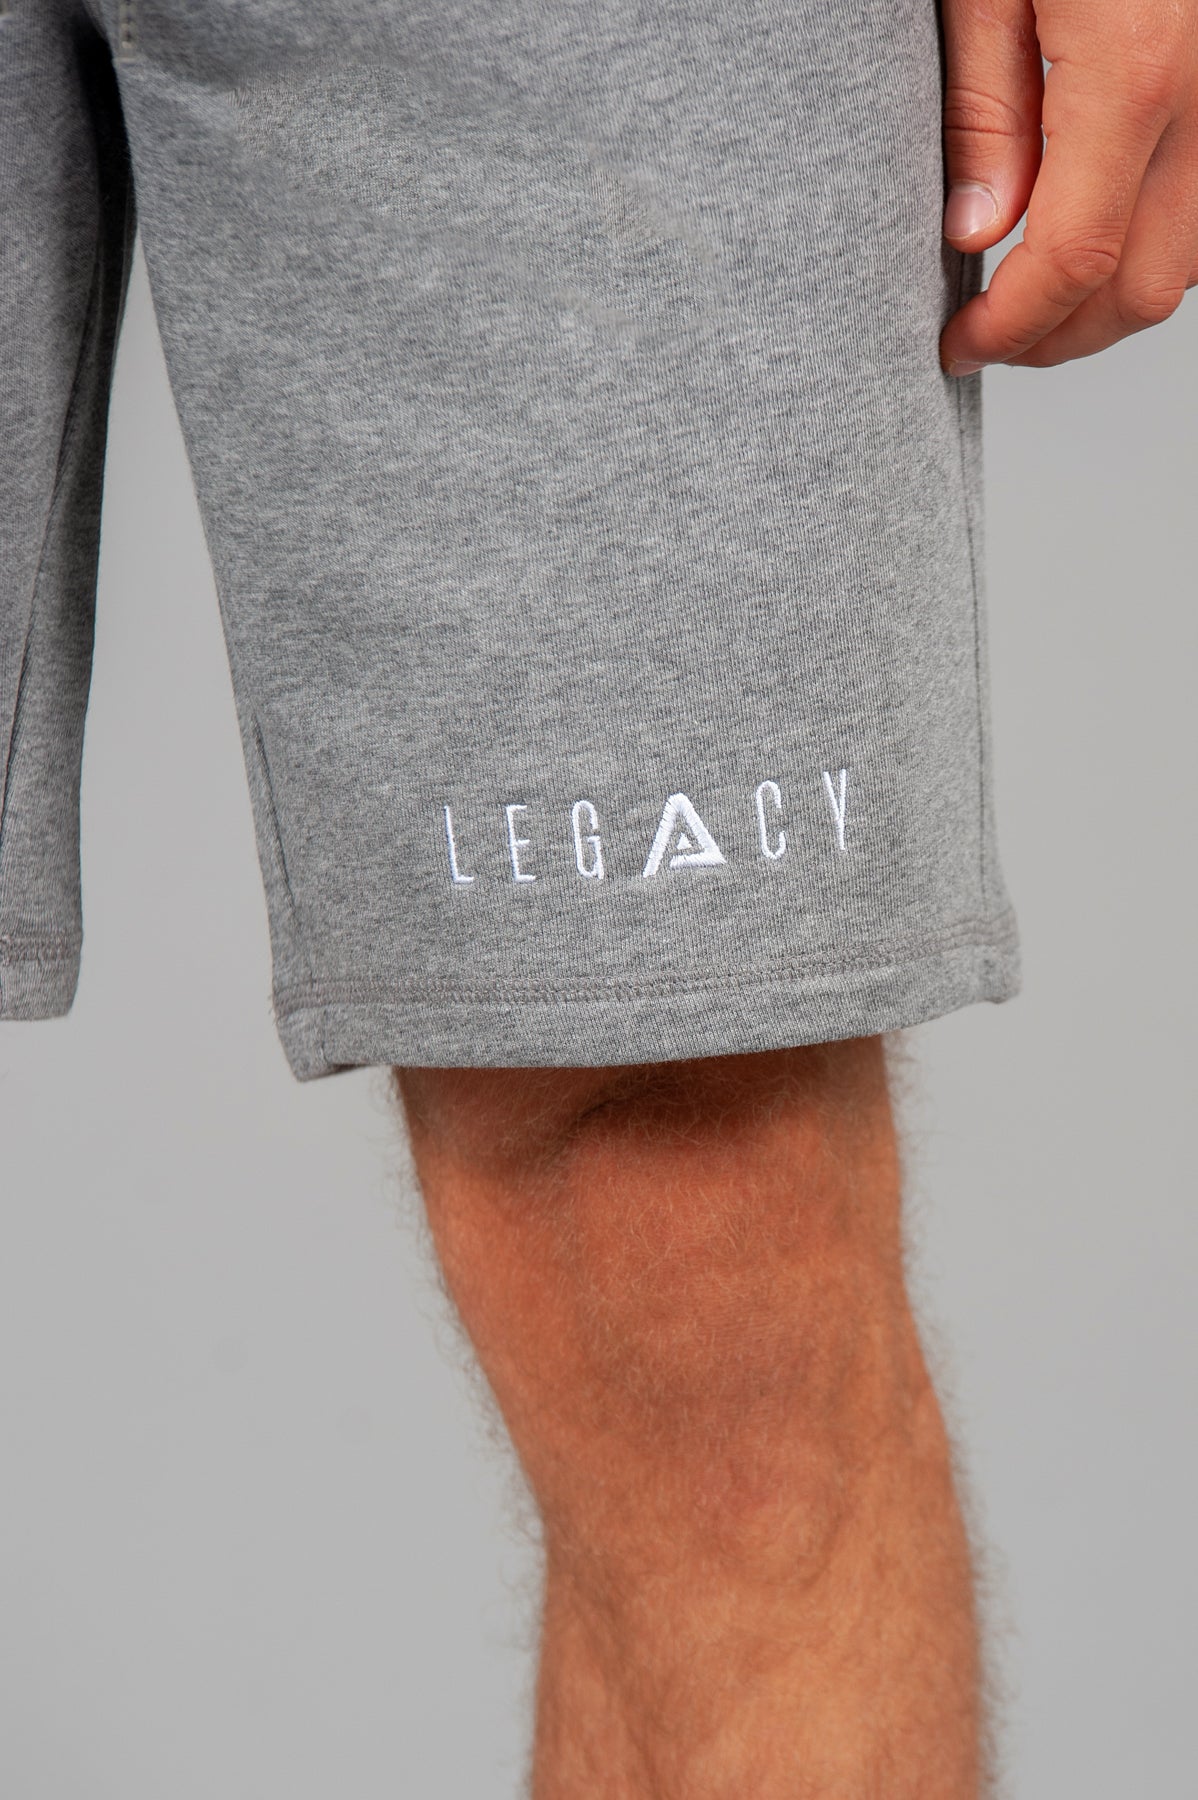 Rest Day Shorts Mid Grey